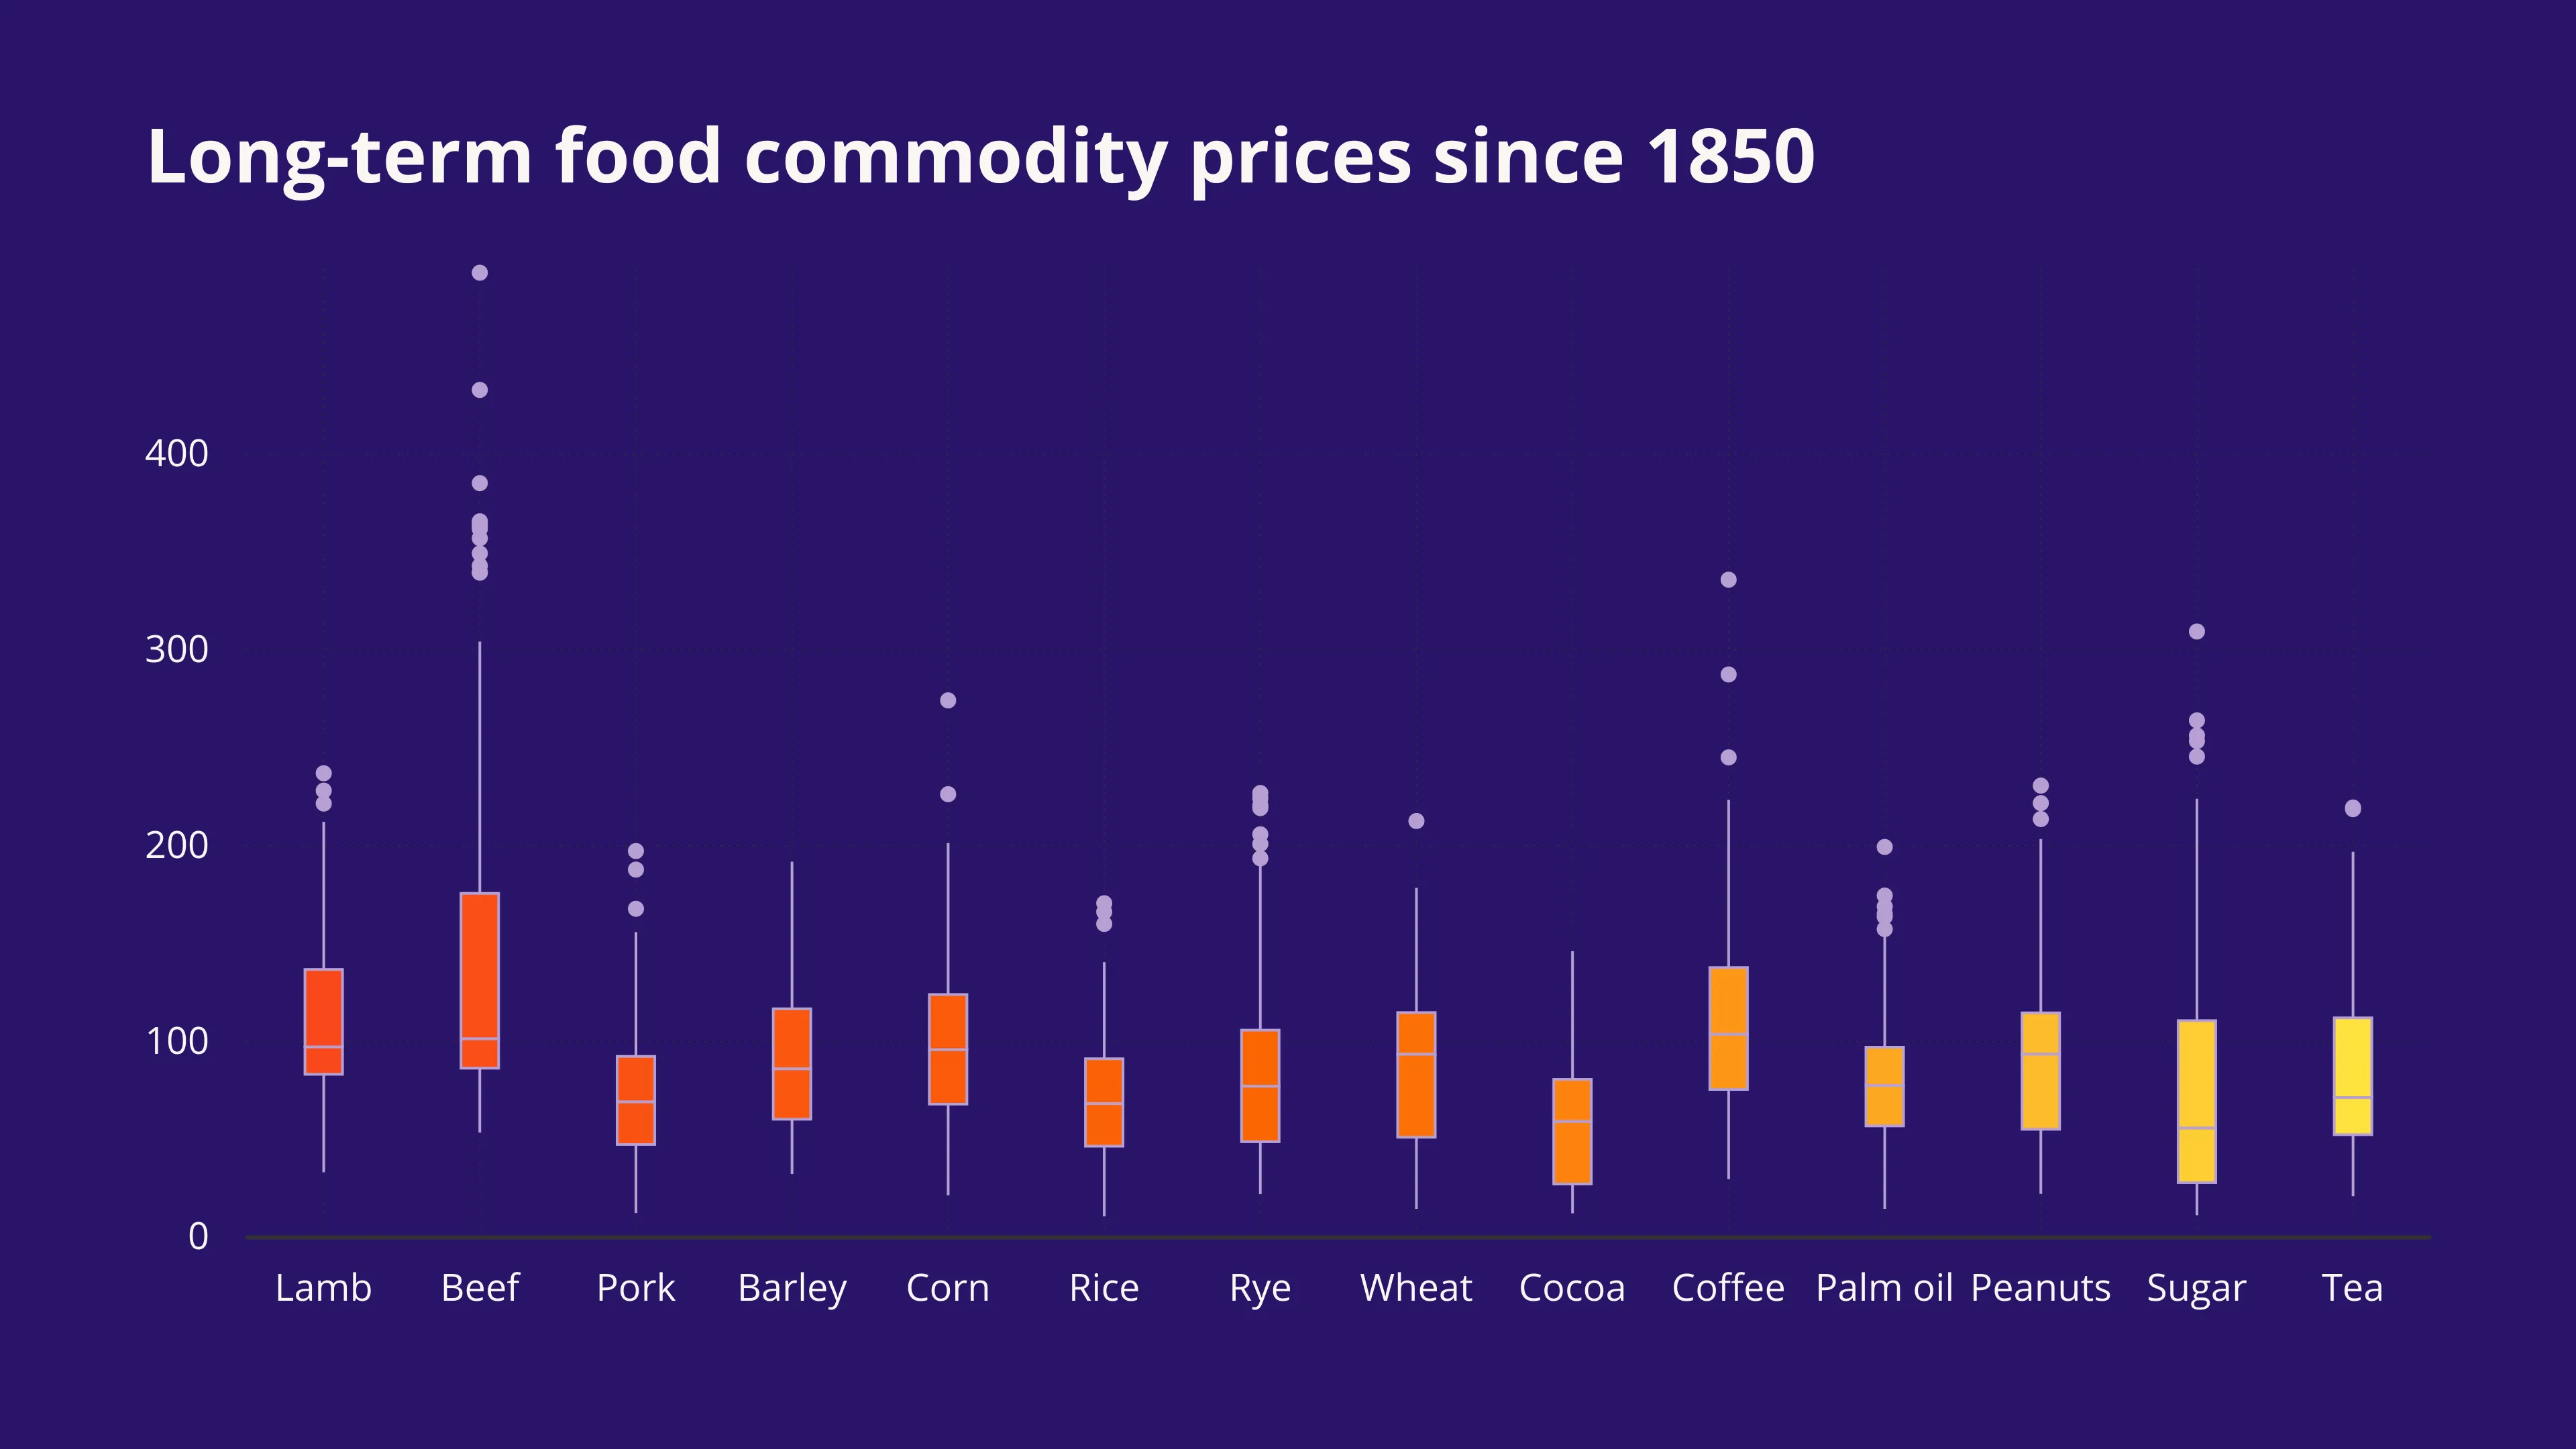 Long-term food commodity prices since 1850